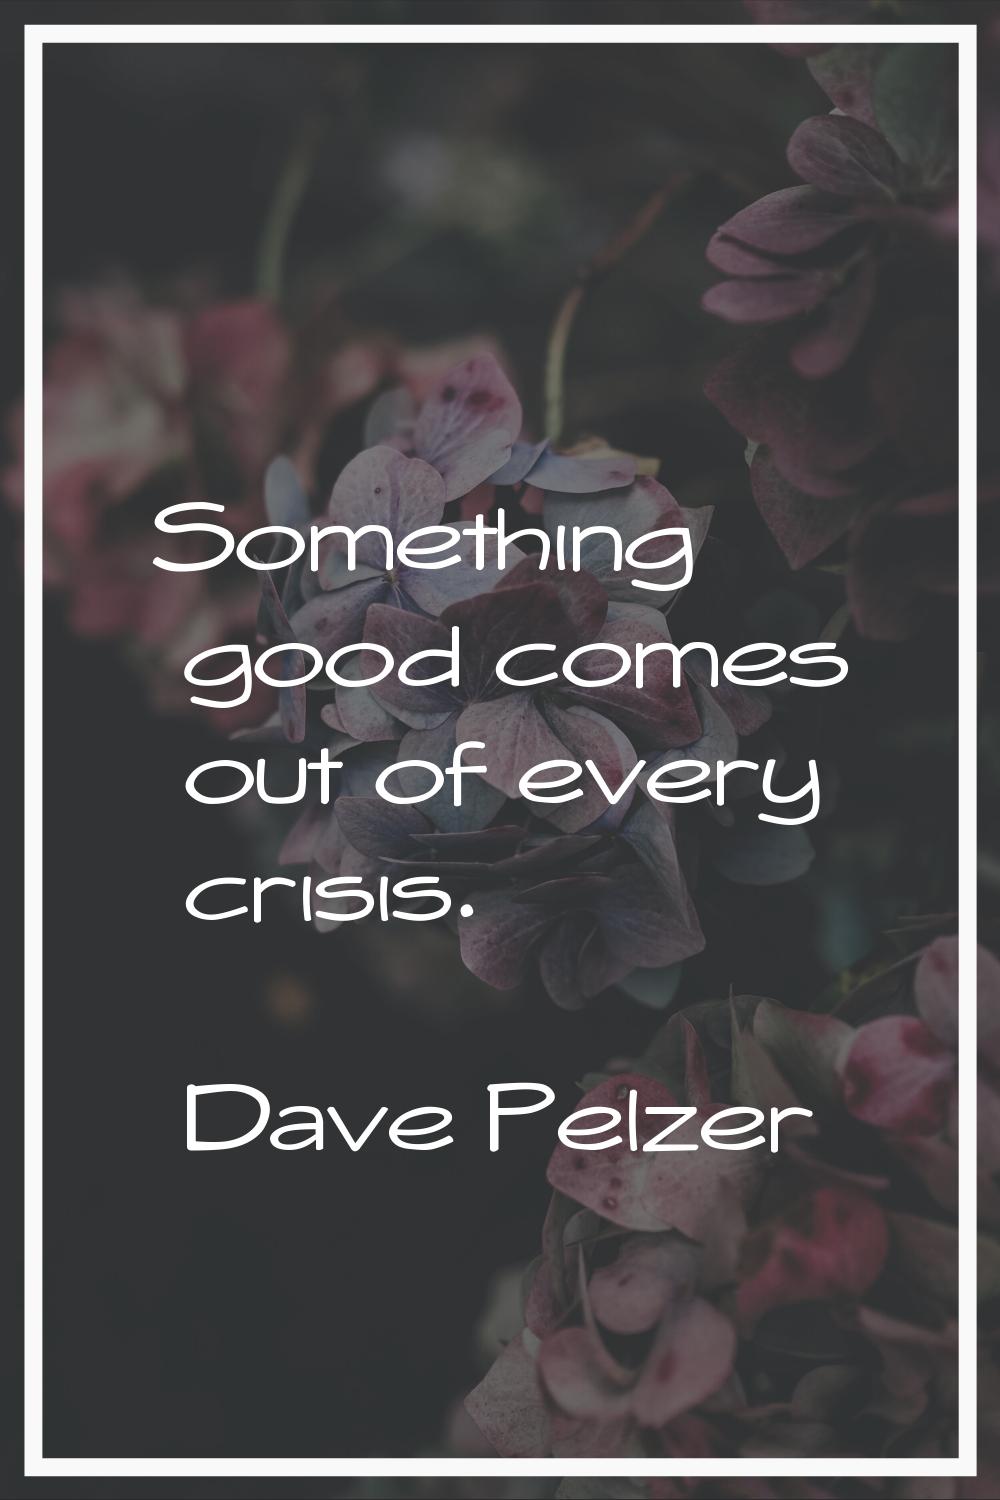 Something good comes out of every crisis.